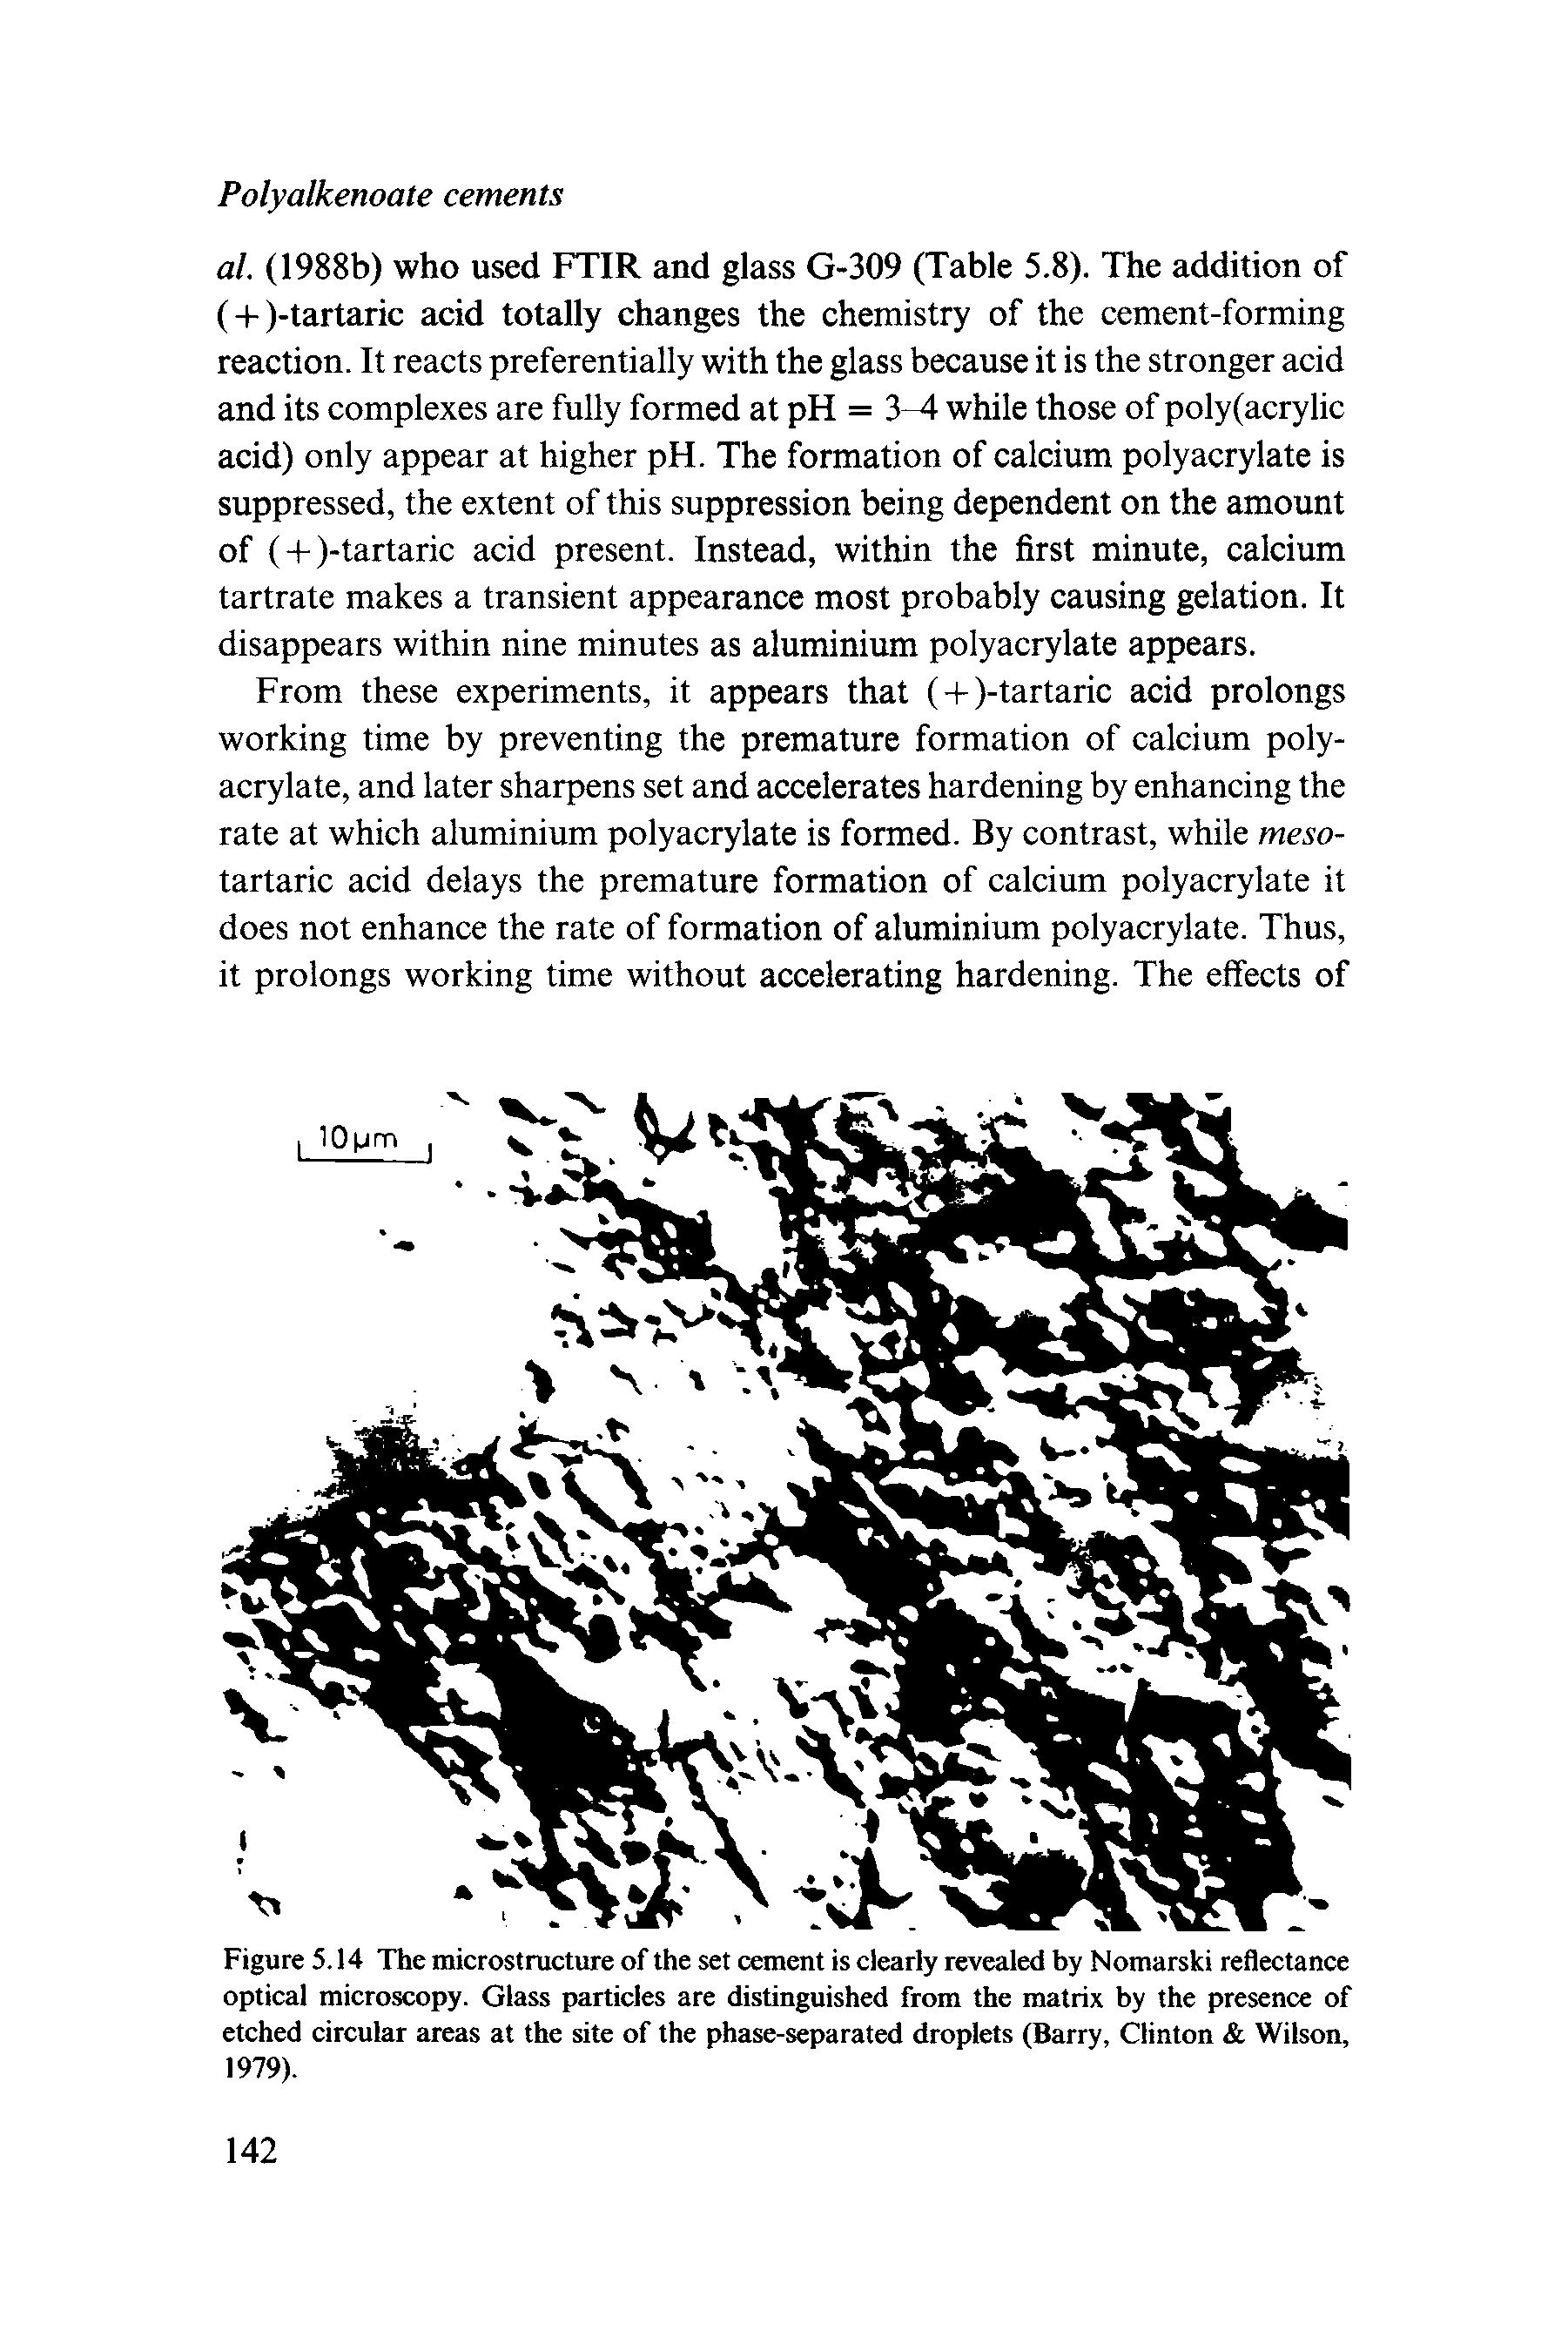 Figure 5.14 The microstructure of the set cement is clearly revealed by Nomarski reflectance optical microscopy. Glass particles are distinguished from the matrix by the presence of etched circular areas at the site of the phase-separated droplets (Barry, Clinton Wilson, 1979).